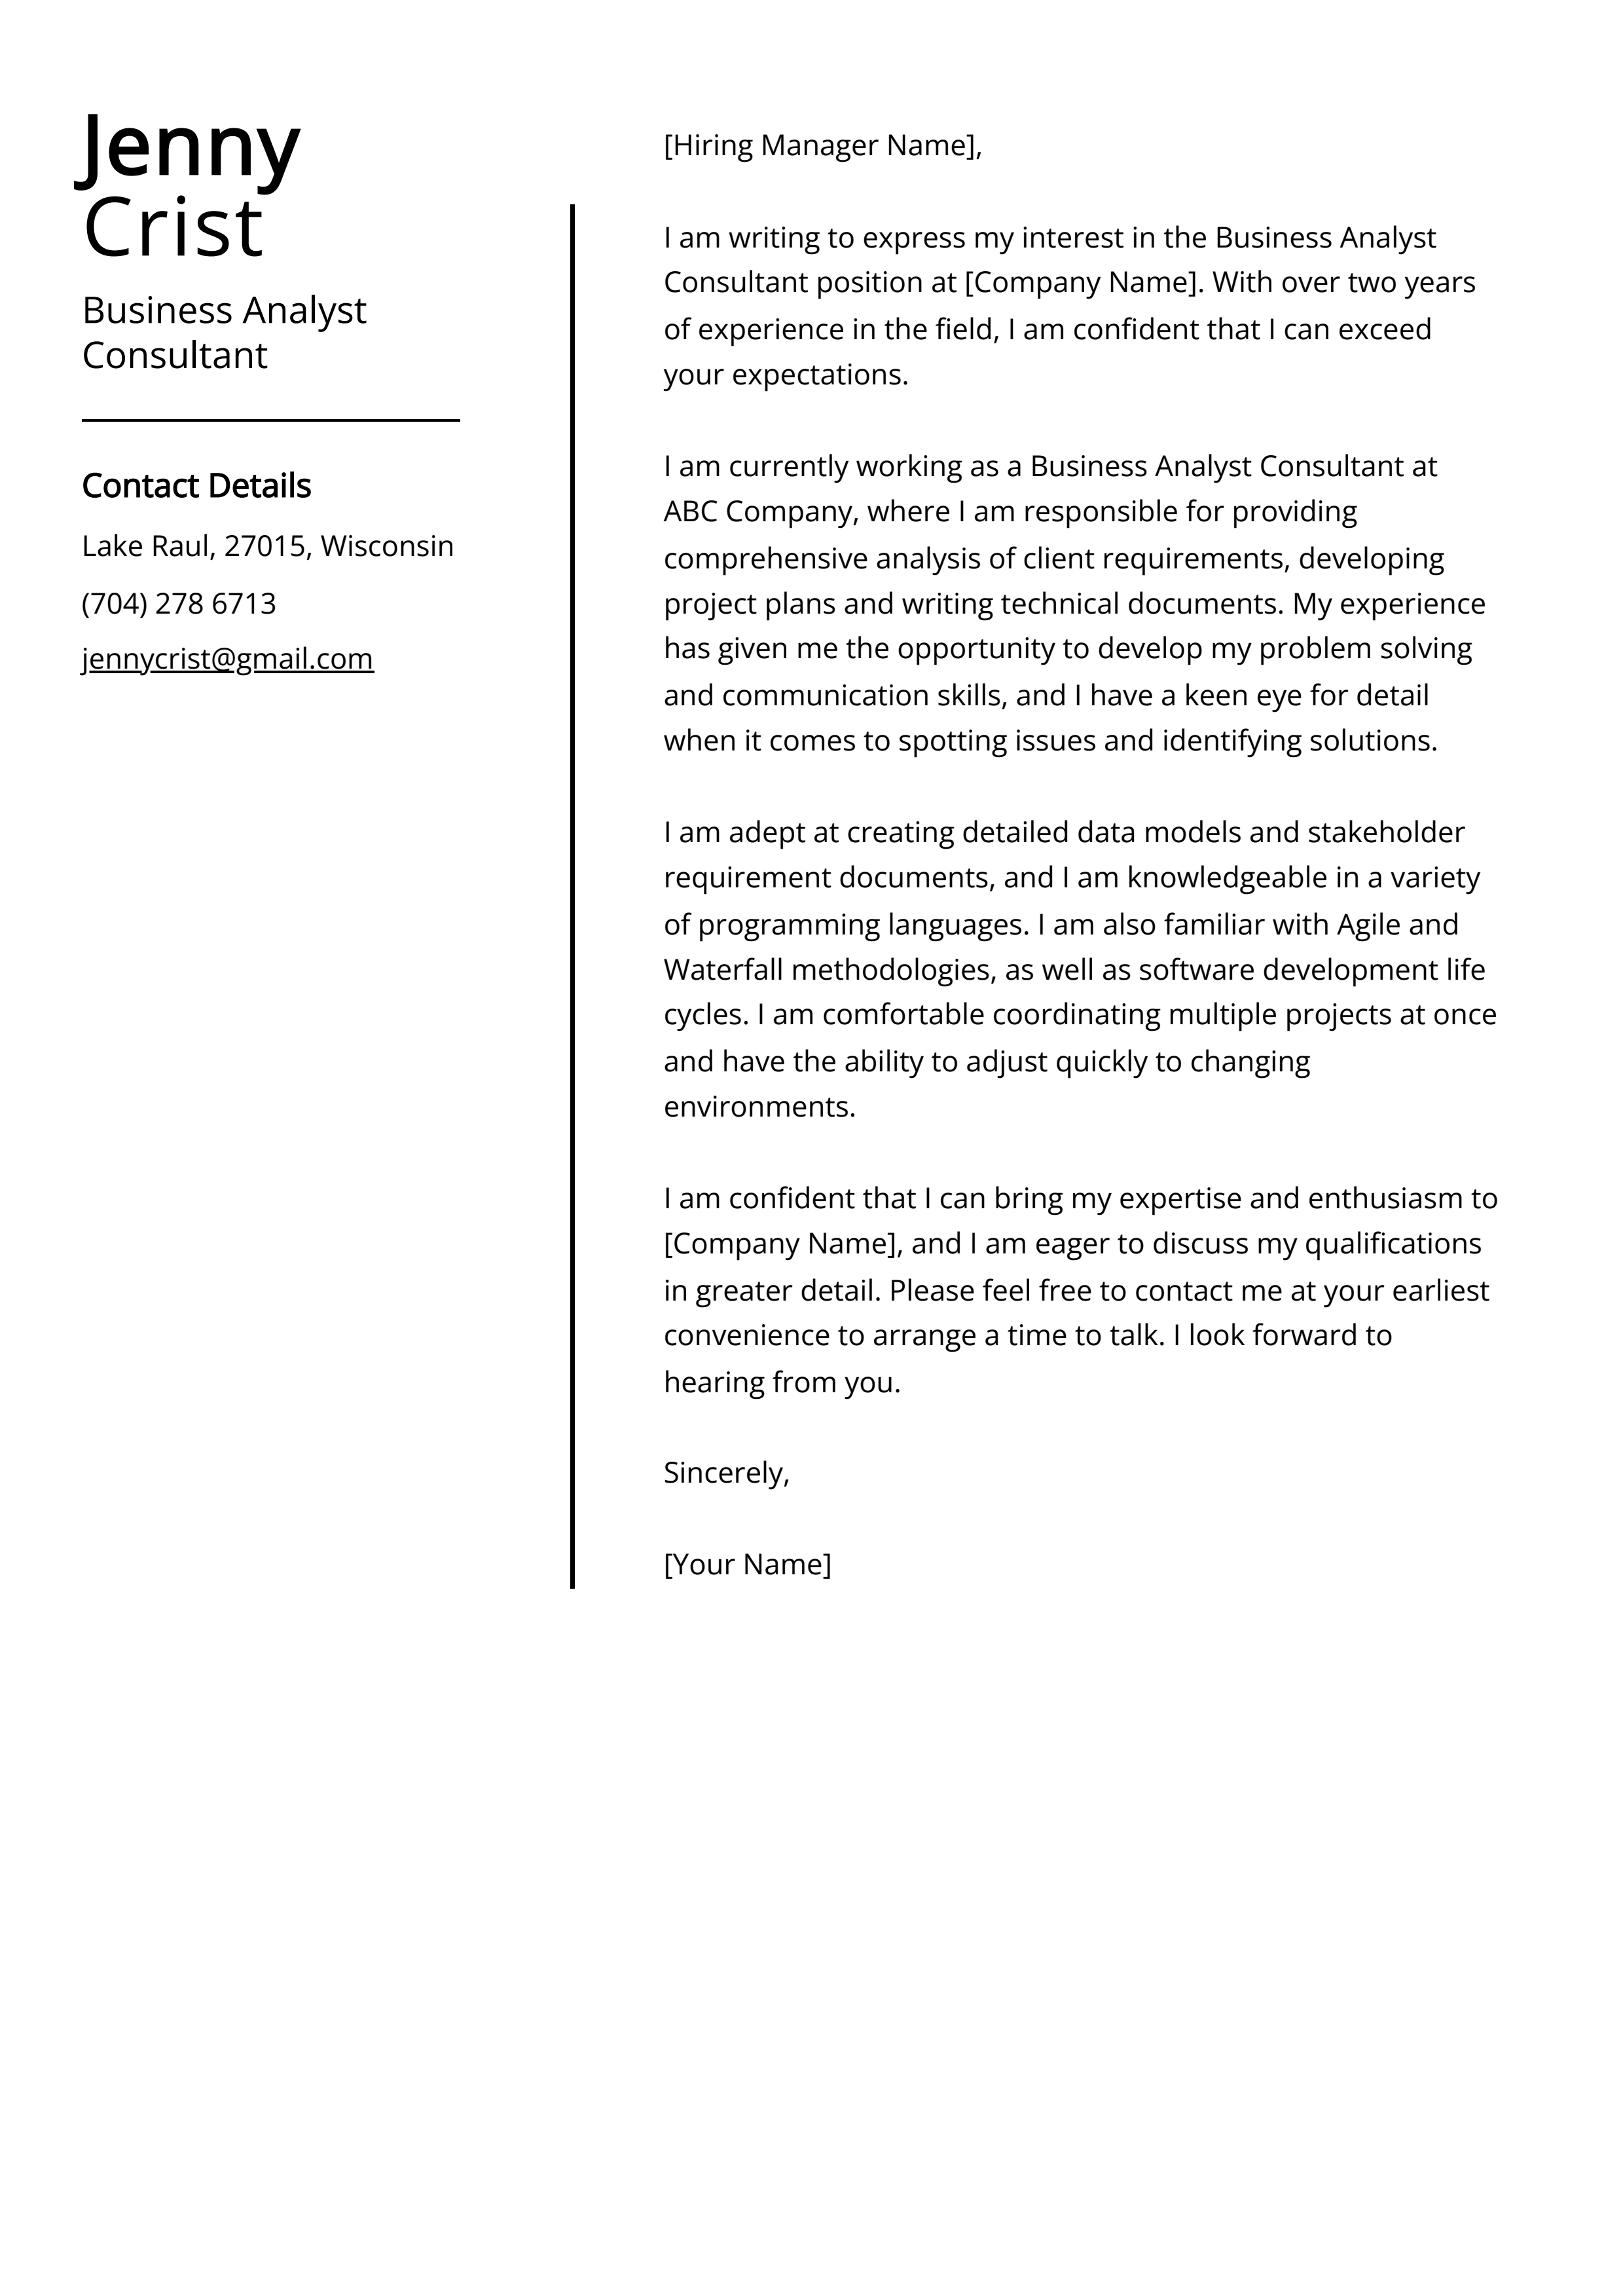 Business Analyst Consultant Cover Letter Example